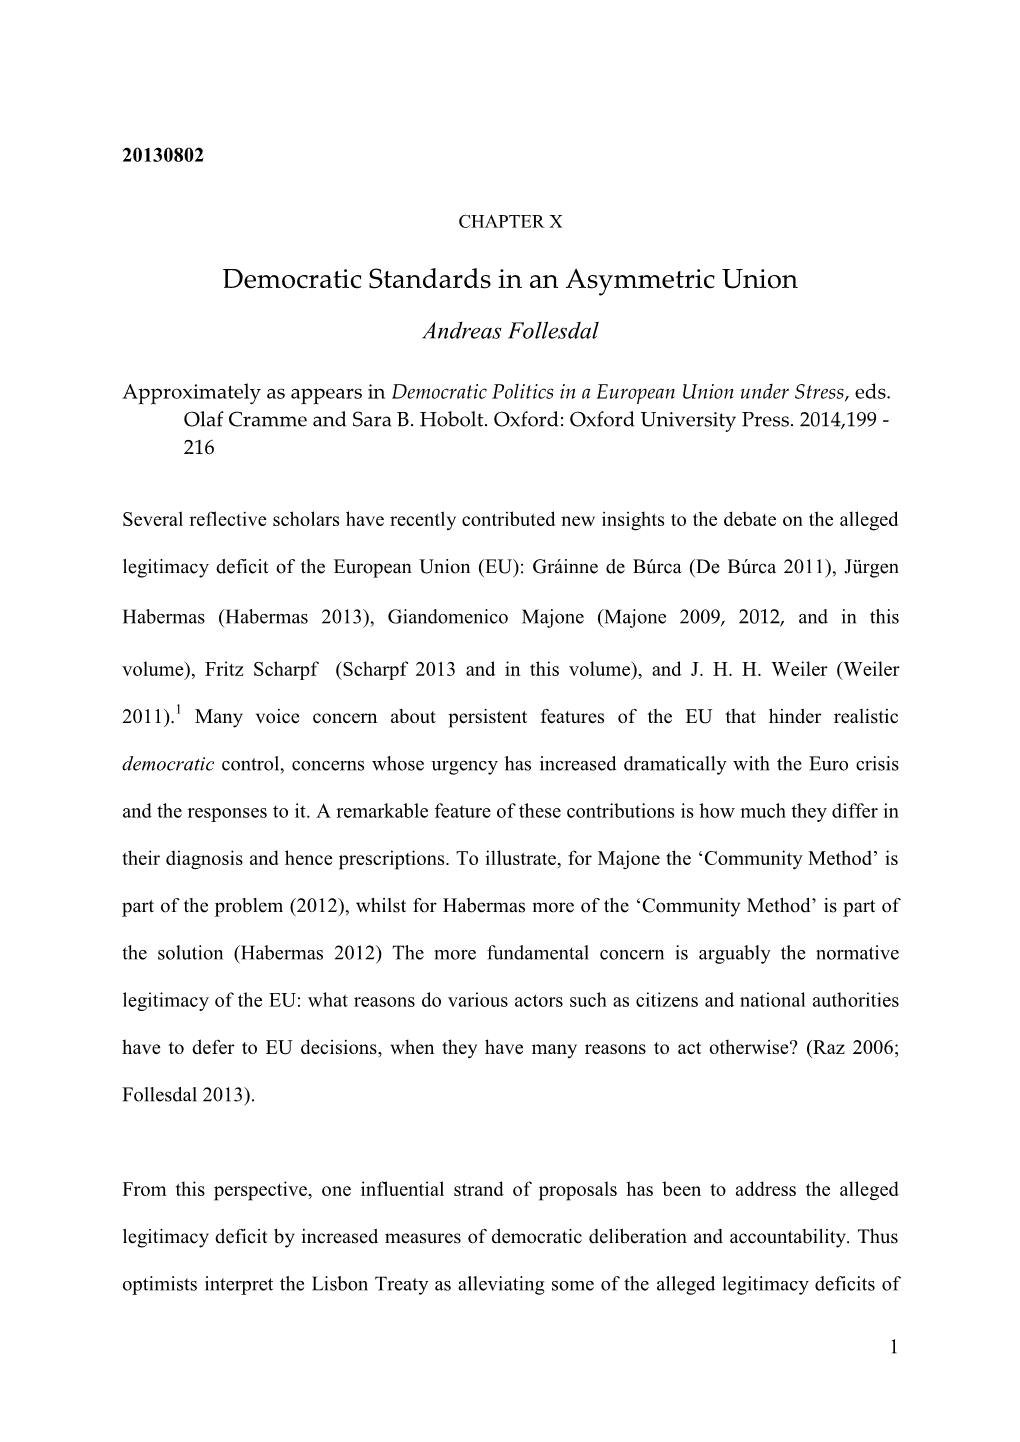 Democratic Standards in an Asymmetric Union Andreas Follesdal